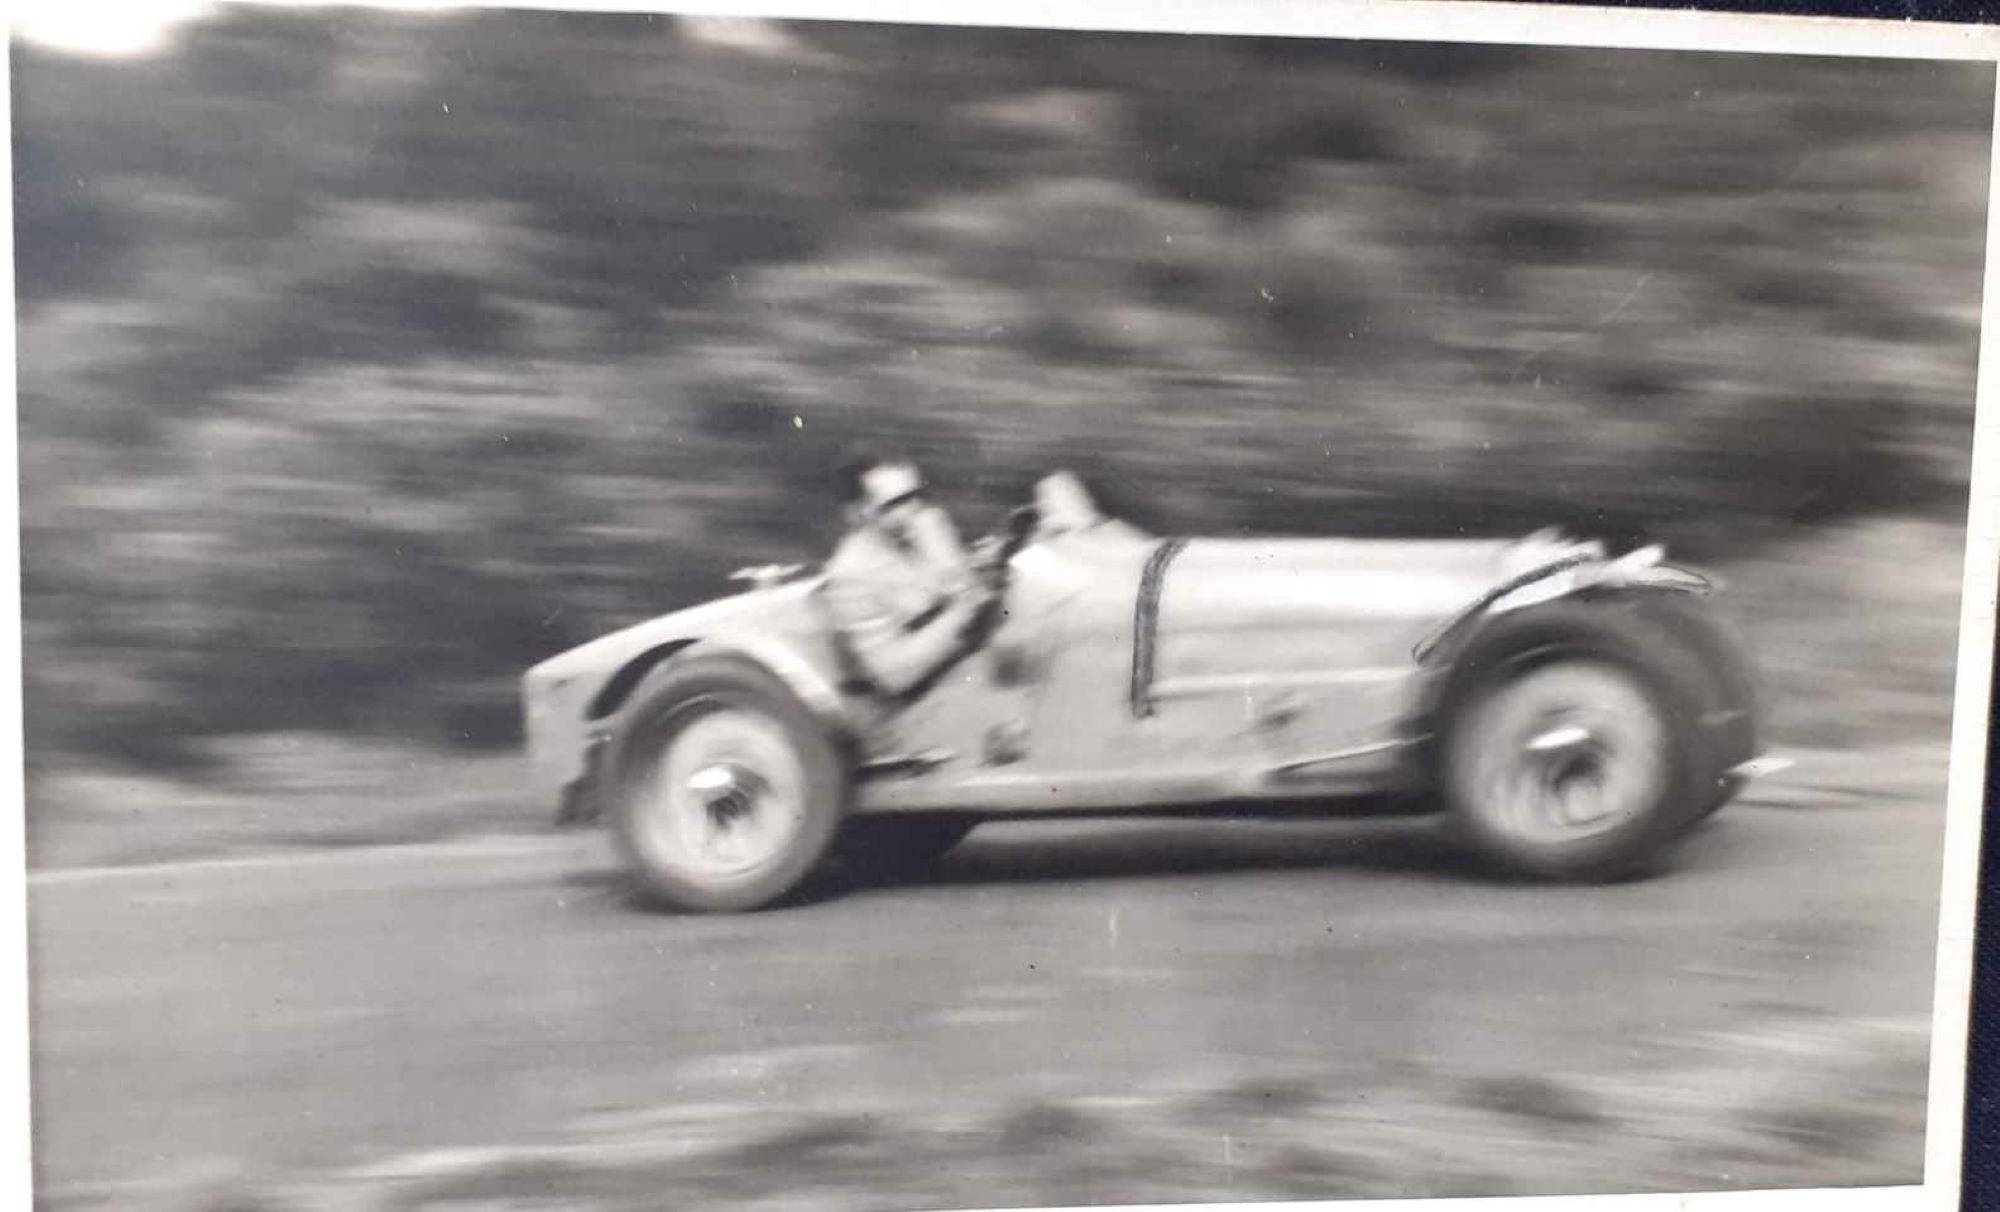 Name:  NSCC 1950 #0116 Bugatti T35 at speed - light colour 1950's - image Graeme Wells arch Anthony Wel.jpg
Views: 269
Size:  158.1 KB